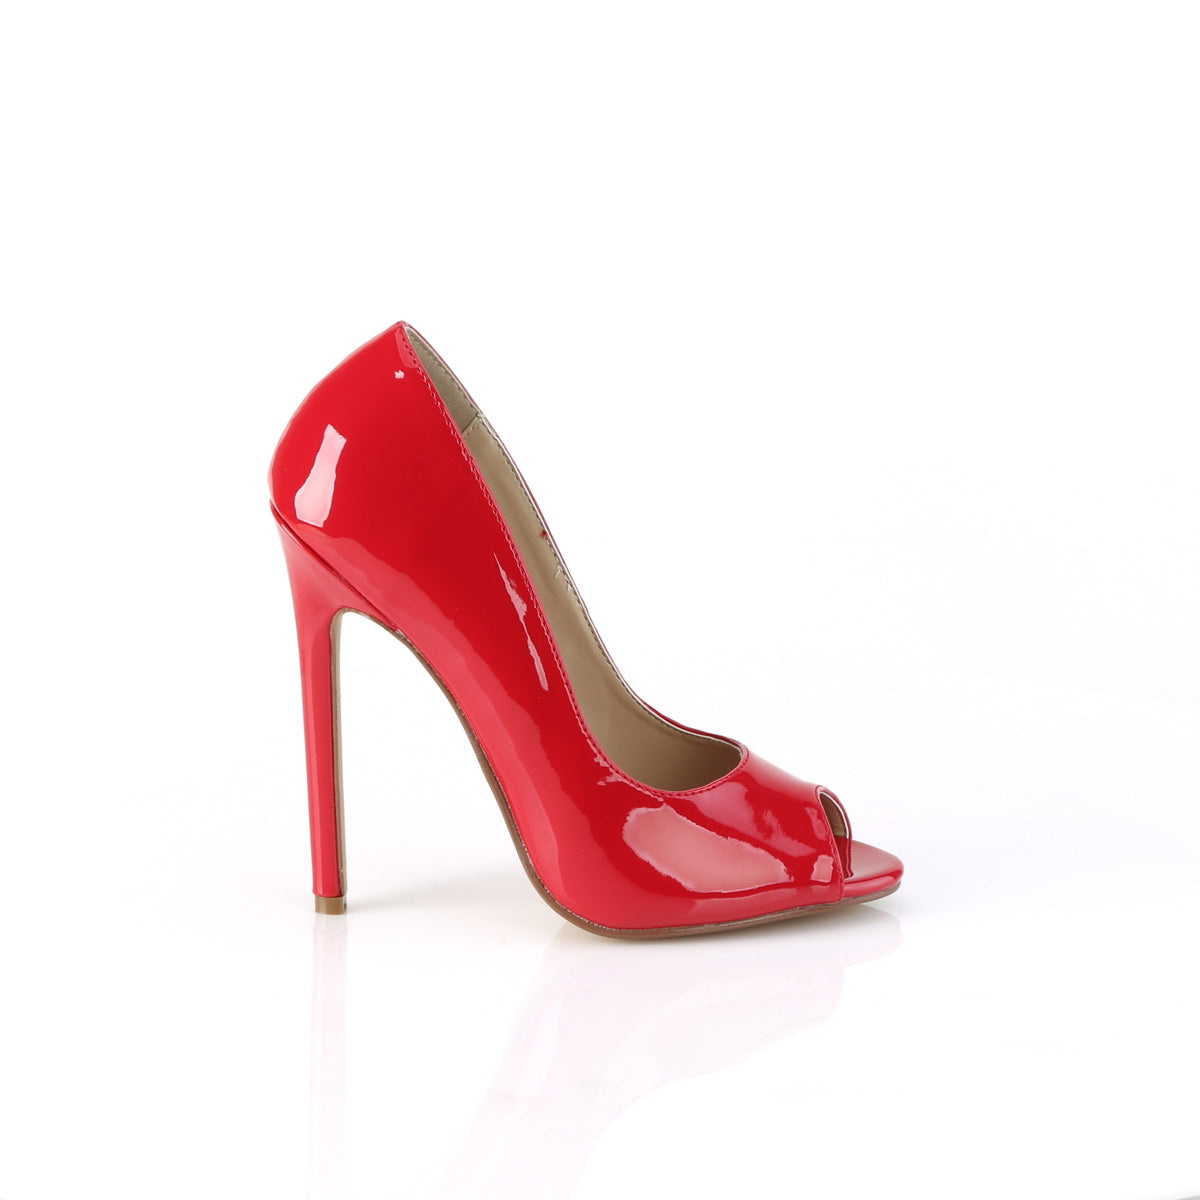 SEXY-42 Red Patent Pump Pleaser